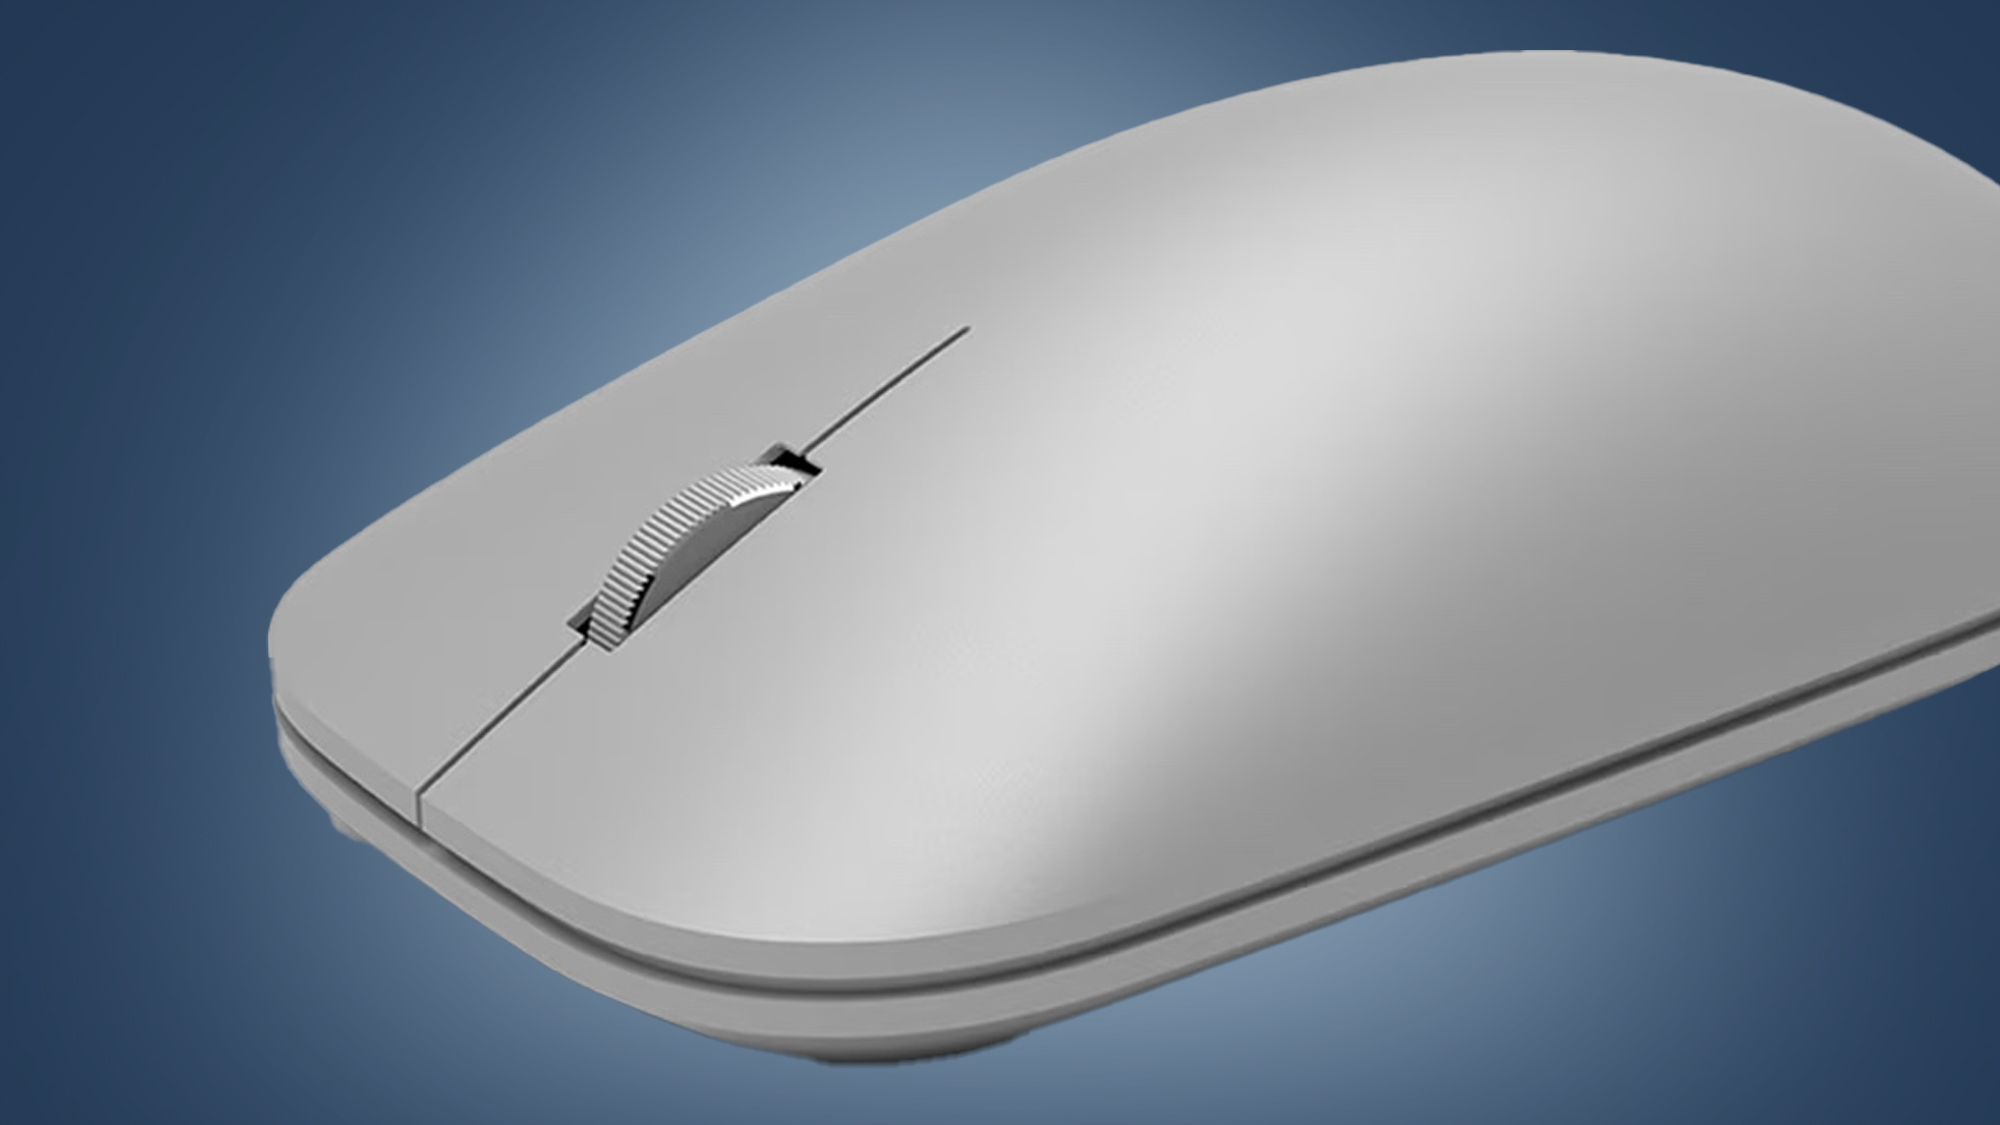 The Microsoft Surface Mouse on a blue background